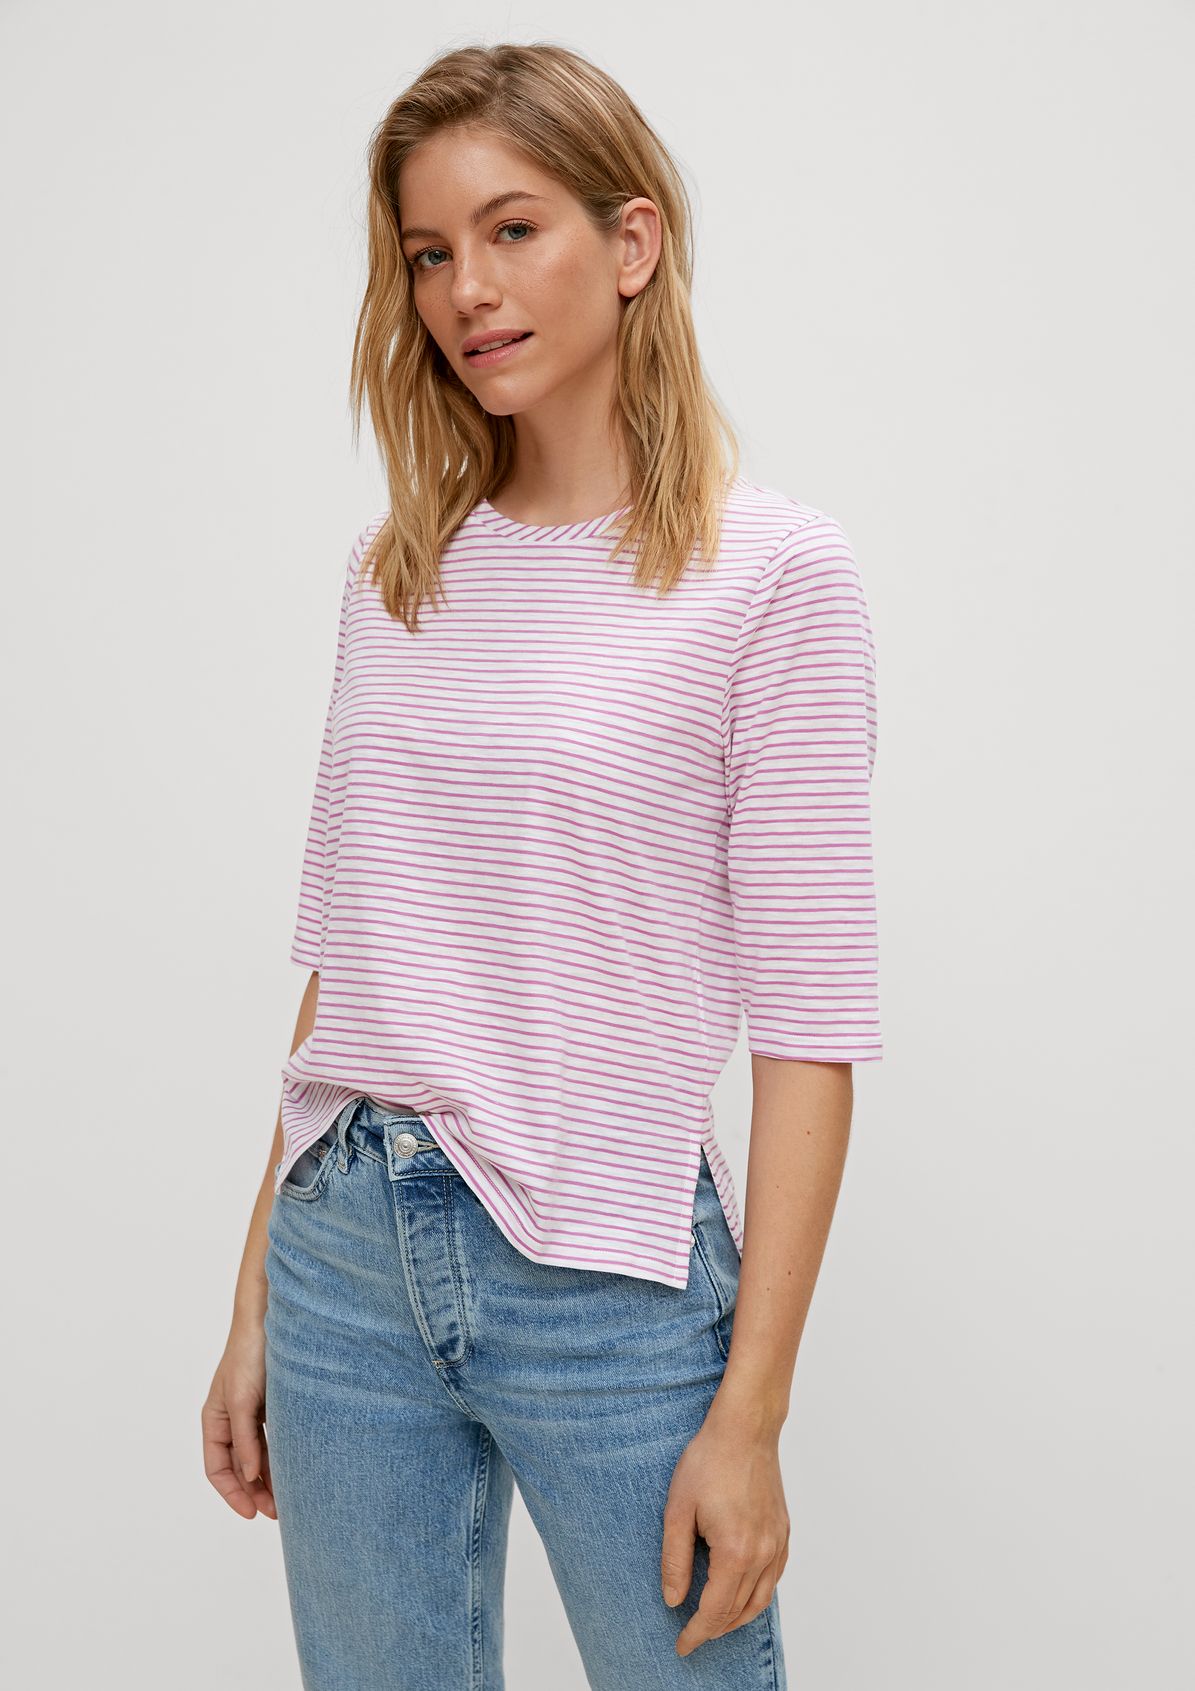 Striped cotton top from comma